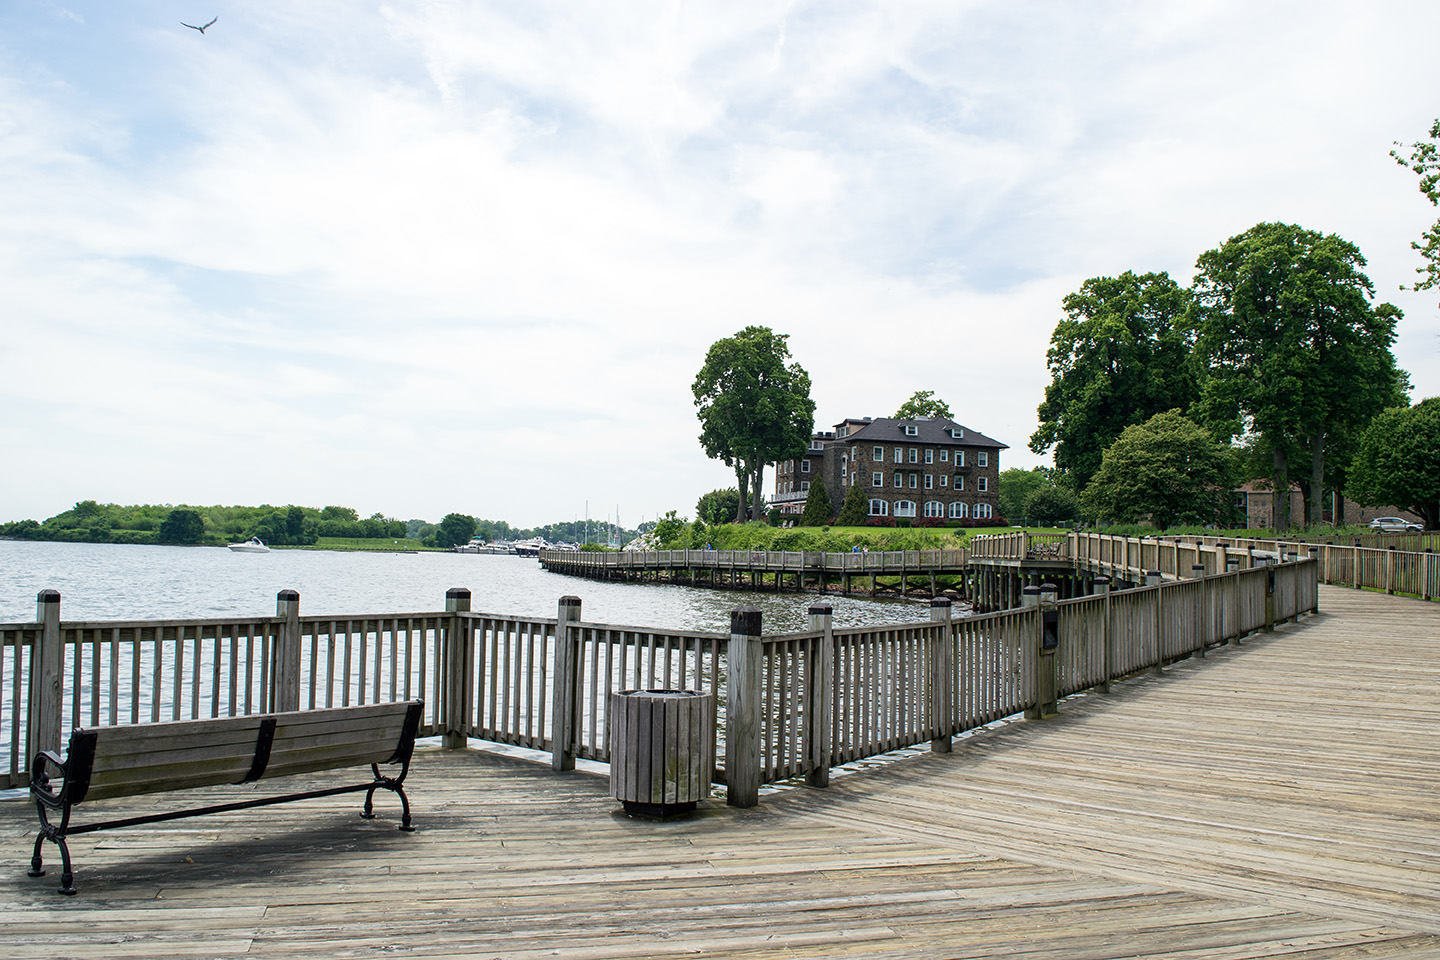 A wooden waterfront walkway in Havre de Grace, MD, with an old brick building in the distance